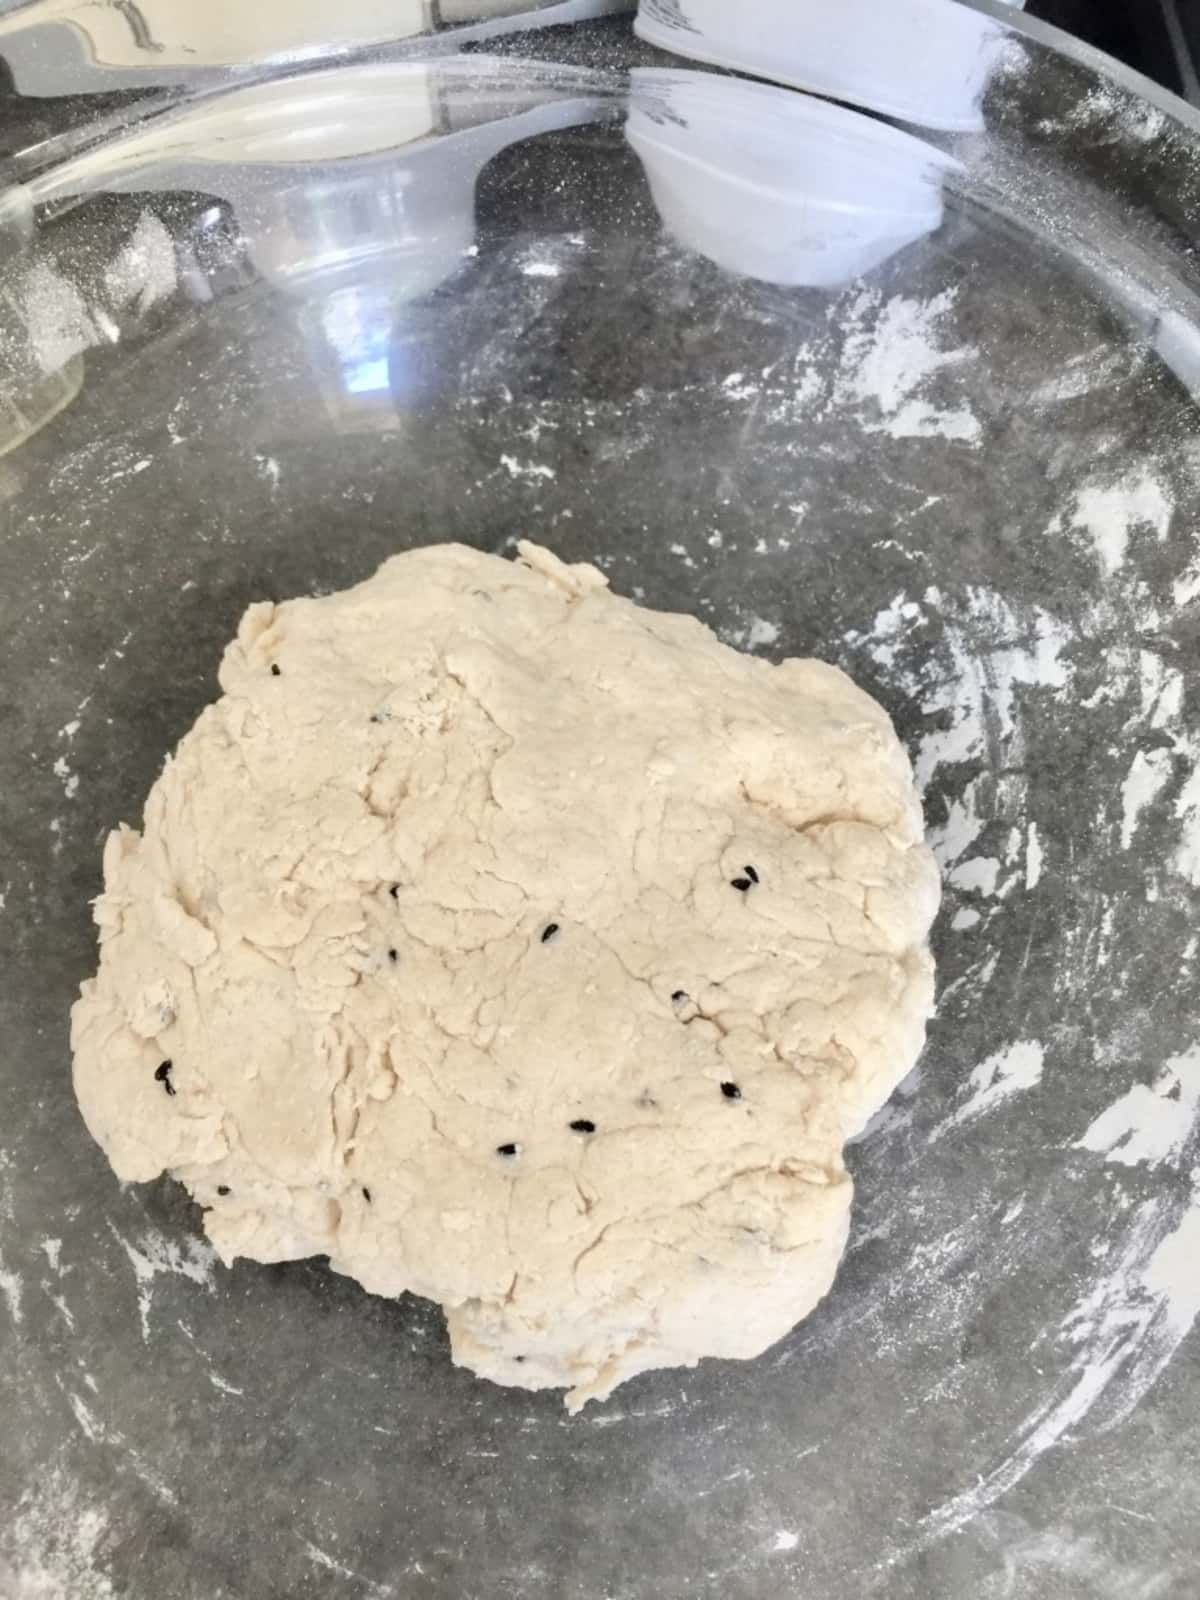 Large ball of naan bread dough in a bowl.